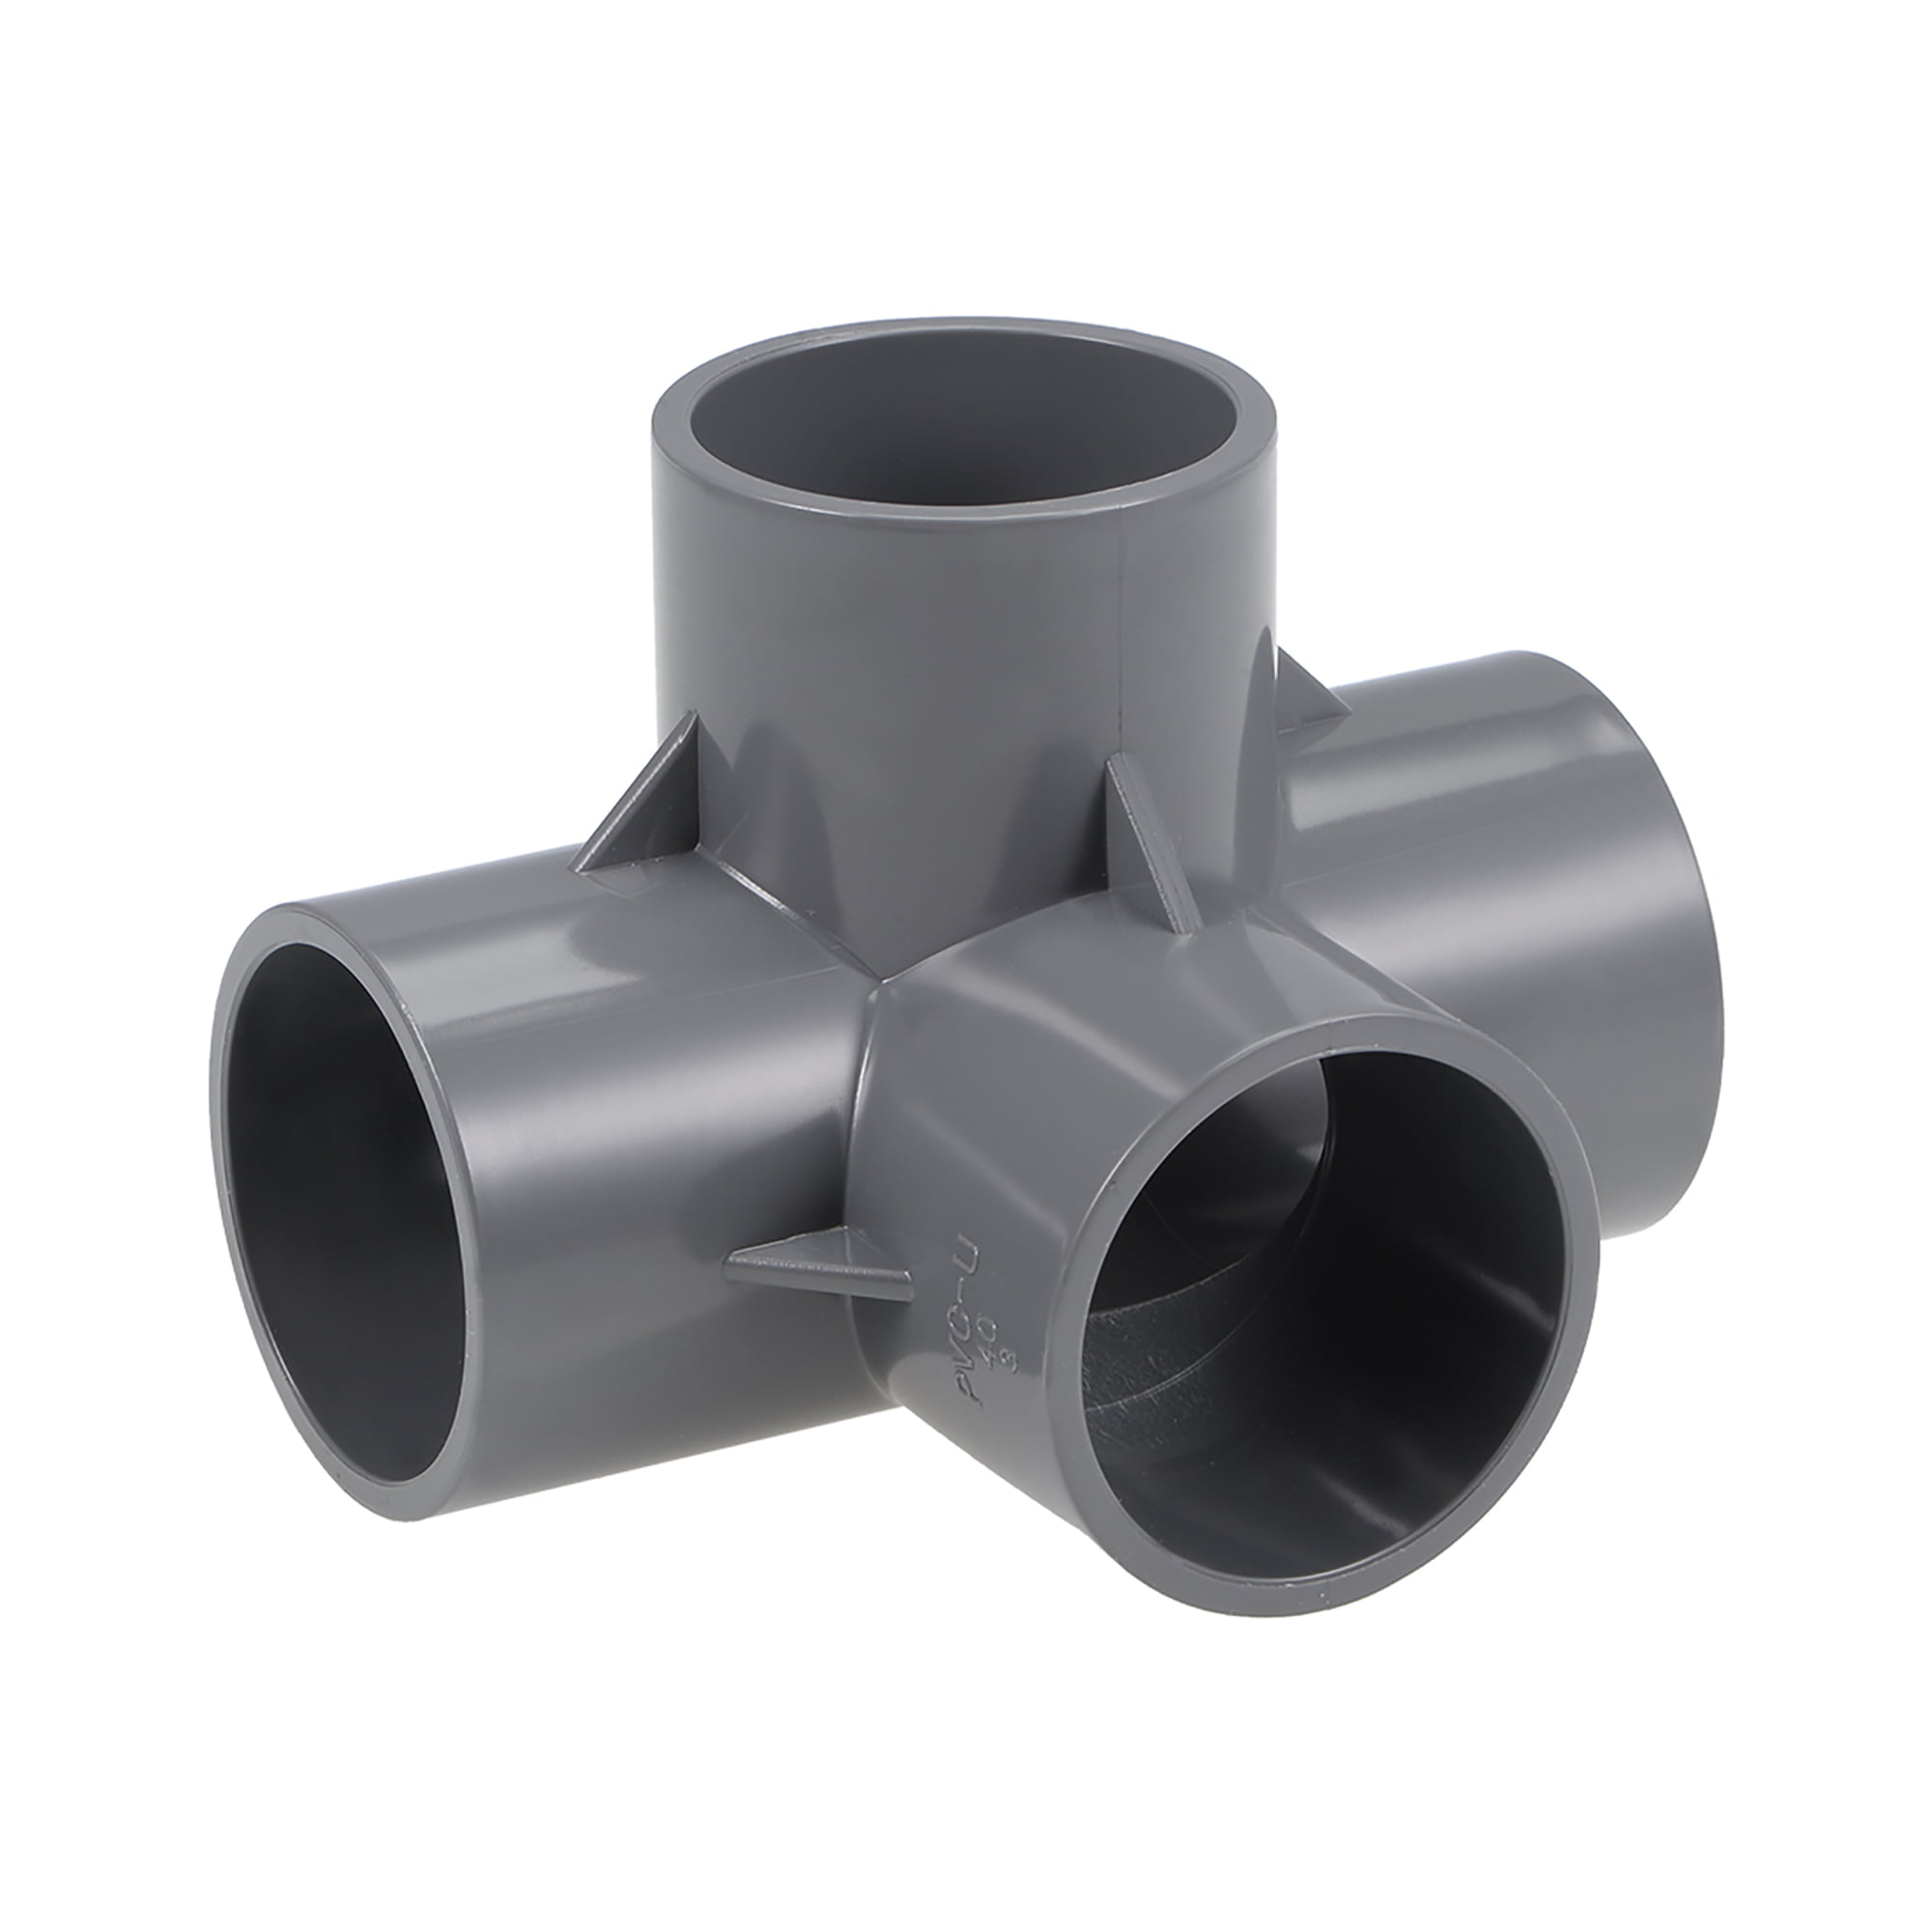 4Way Elbow PVC Pipe Fitting,Furniture Grade,11/4inch